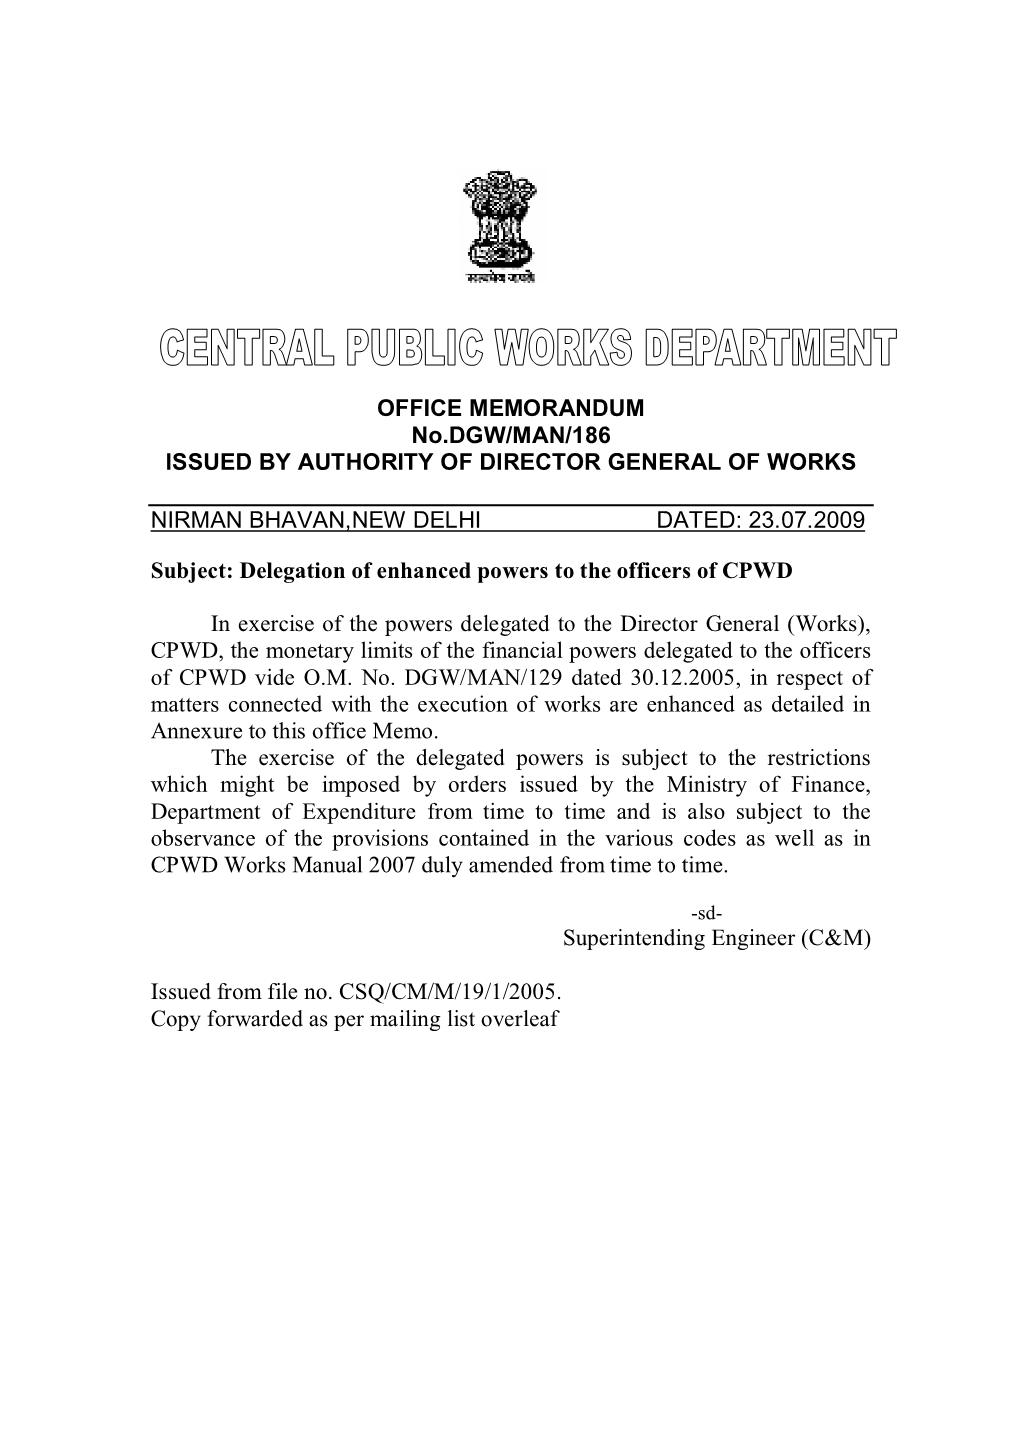 OFFICE MEMORANDUM No.DGW/MAN/186 ISSUED by AUTHORITY of DIRECTOR GENERAL of WORKS